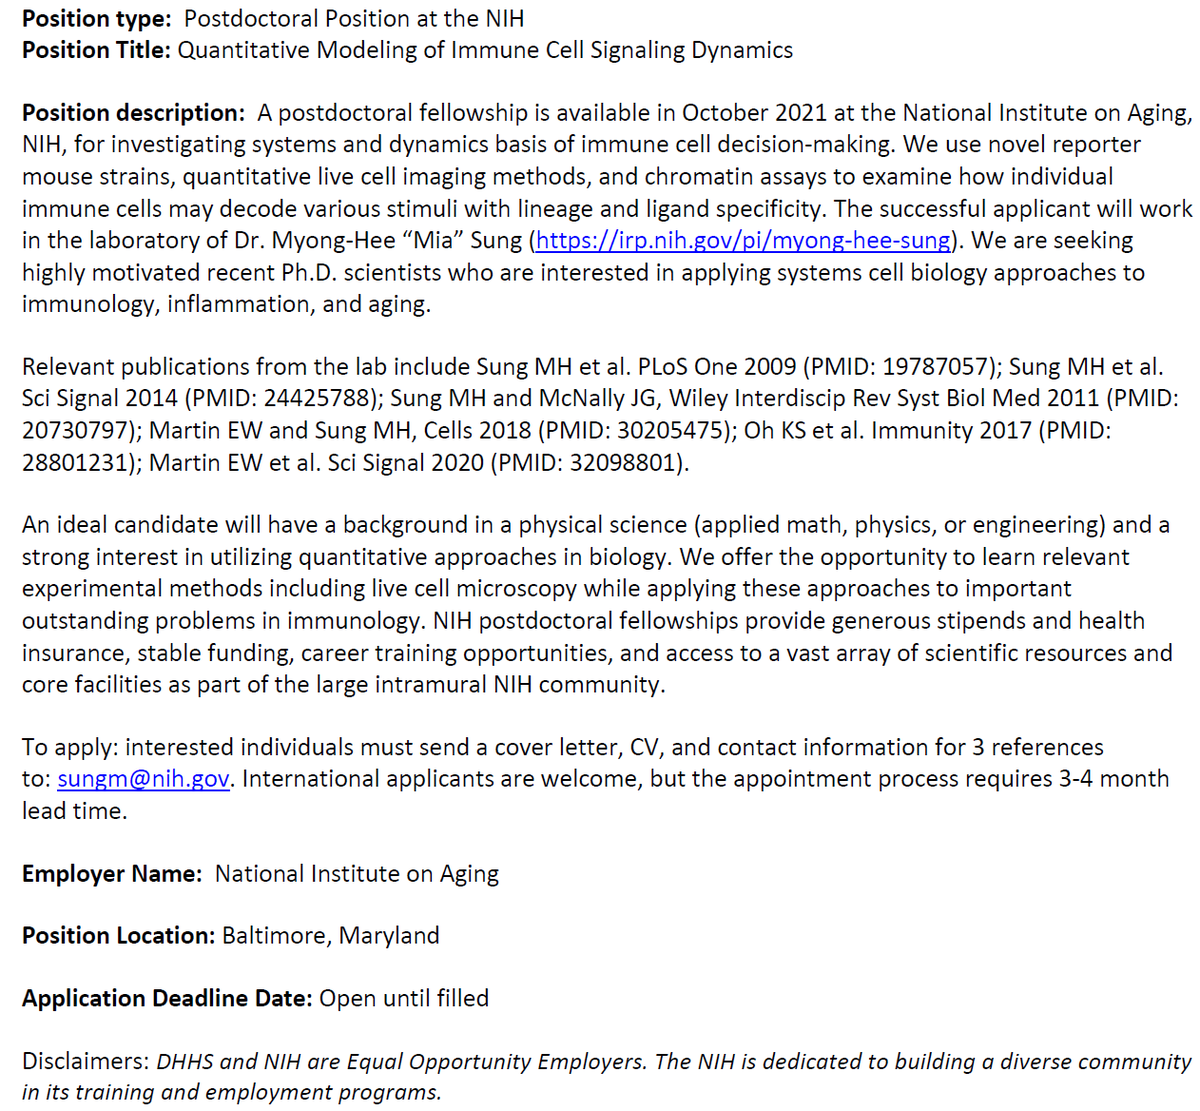 A postdoc opening in the Sung lab @NIH! Posting an early draft of the advertisement. Plz RT #systemsbiology #quantitativebiology #modeling #cellsignaling